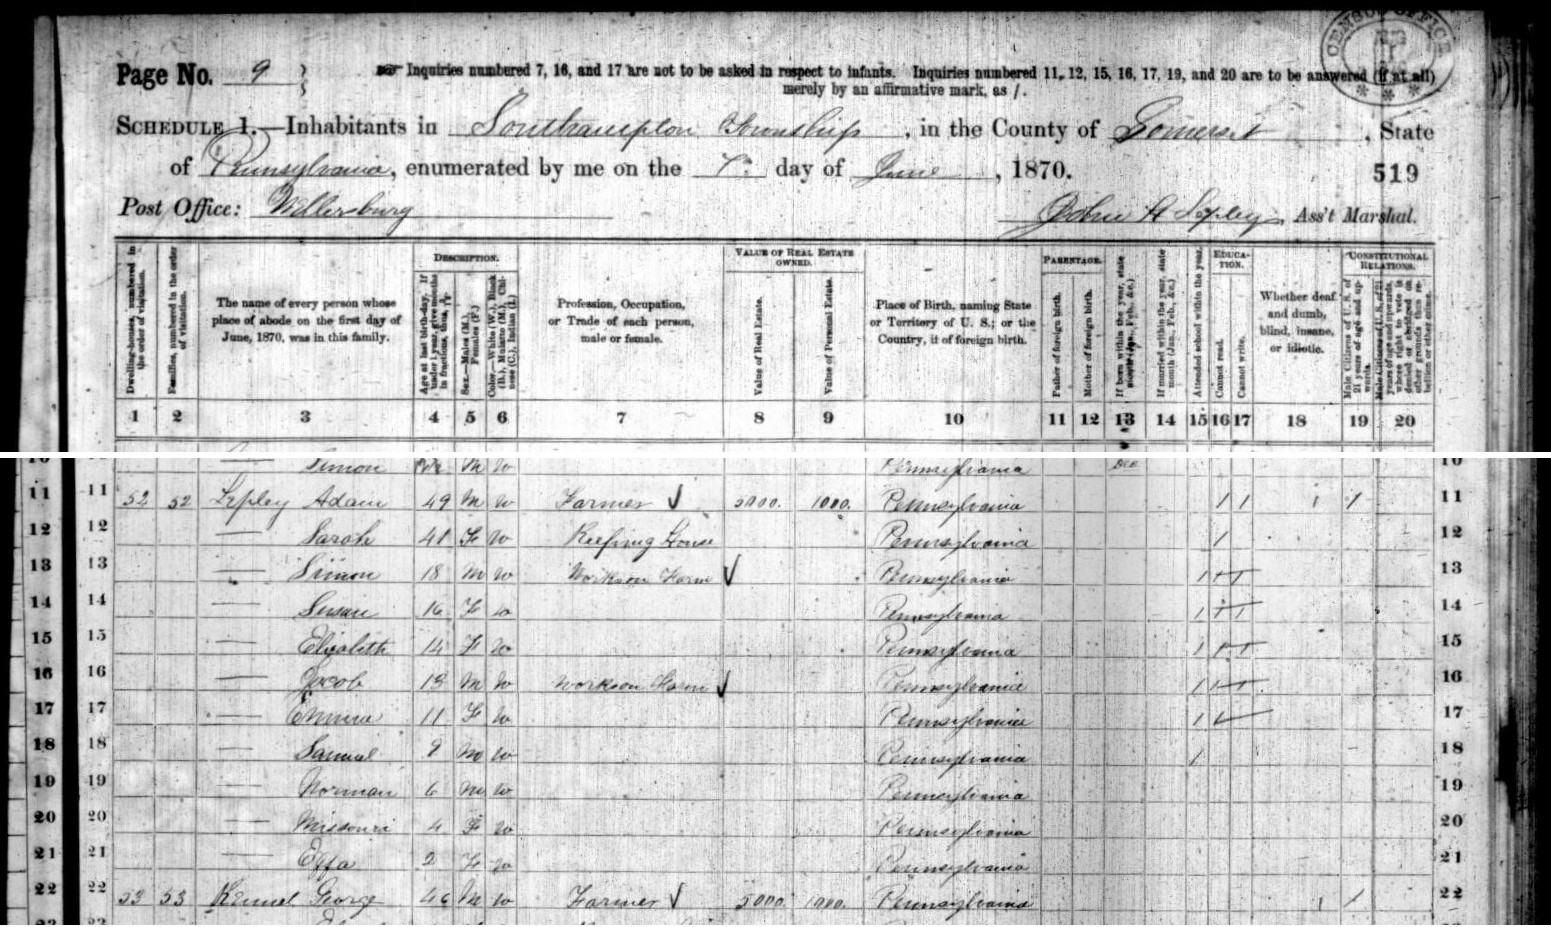 Excerpt from the 1870 census records of Southampton Township, Somerset County, Pennsylvania.